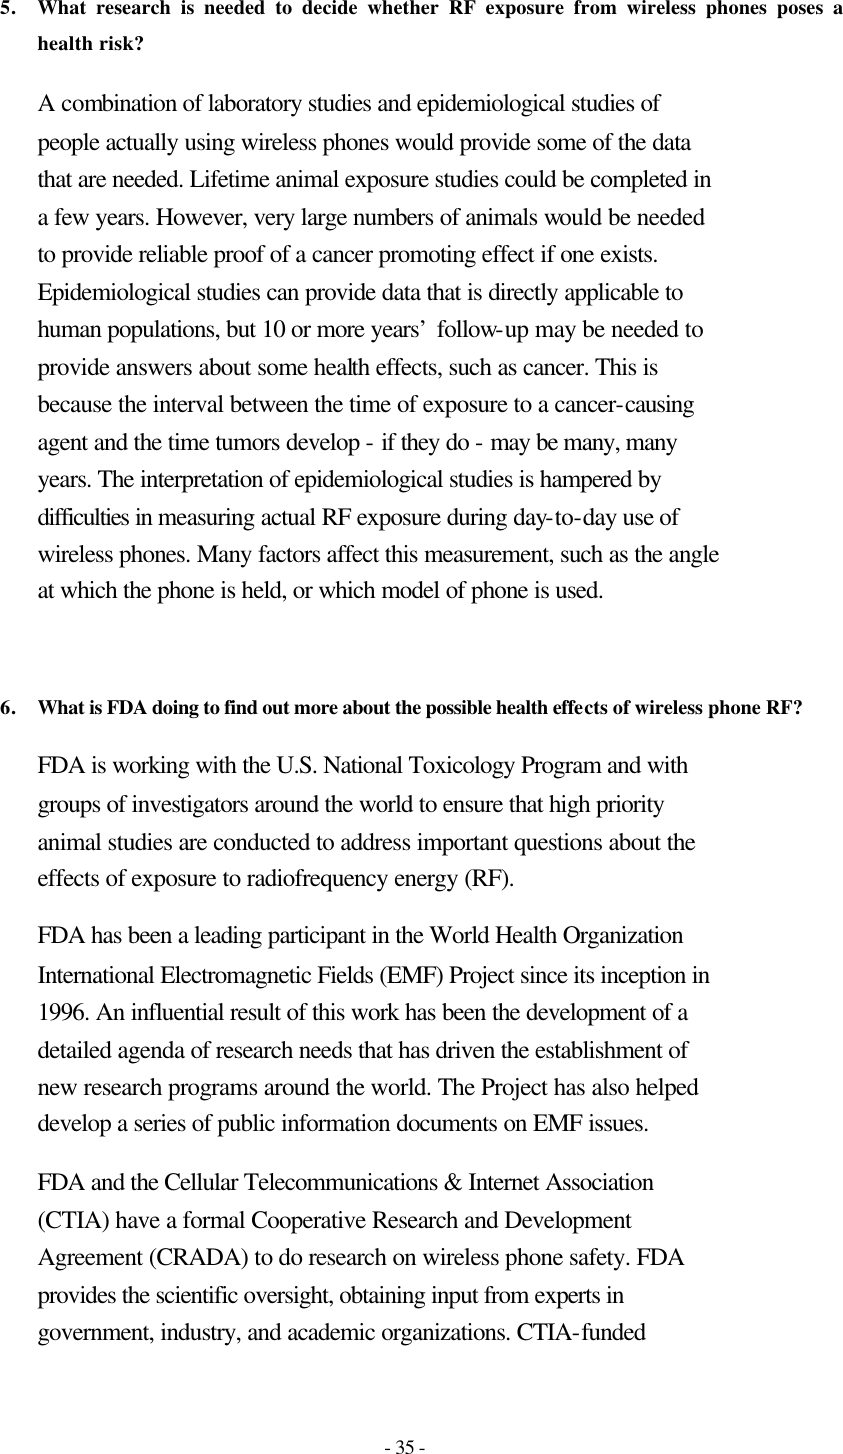 - 35 - 5. What research is needed to decide whether RF exposure from wireless phones poses a health risk?  A combination of laboratory studies and epidemiological studies of people actually using wireless phones would provide some of the data that are needed. Lifetime animal exposure studies could be completed in a few years. However, very large numbers of animals would be needed to provide reliable proof of a cancer promoting effect if one exists. Epidemiological studies can provide data that is directly applicable to human populations, but 10 or more years’ follow-up may be needed to provide answers about some health effects, such as cancer. This is because the interval between the time of exposure to a cancer-causing agent and the time tumors develop - if they do - may be many, many years. The interpretation of epidemiological studies is hampered by difficulties in measuring actual RF exposure during day-to-day use of wireless phones. Many factors affect this measurement, such as the angle at which the phone is held, or which model of phone is used.   6. What is FDA doing to find out more about the possible health effects of wireless phone RF?  FDA is working with the U.S. National Toxicology Program and with groups of investigators around the world to ensure that high priority animal studies are conducted to address important questions about the effects of exposure to radiofrequency energy (RF). FDA has been a leading participant in the World Health Organization International Electromagnetic Fields (EMF) Project since its inception in 1996. An influential result of this work has been the development of a detailed agenda of research needs that has driven the establishment of new research programs around the world. The Project has also helped develop a series of public information documents on EMF issues. FDA and the Cellular Telecommunications &amp; Internet Association (CTIA) have a formal Cooperative Research and Development Agreement (CRADA) to do research on wireless phone safety. FDA provides the scientific oversight, obtaining input from experts in government, industry, and academic organizations. CTIA-funded 